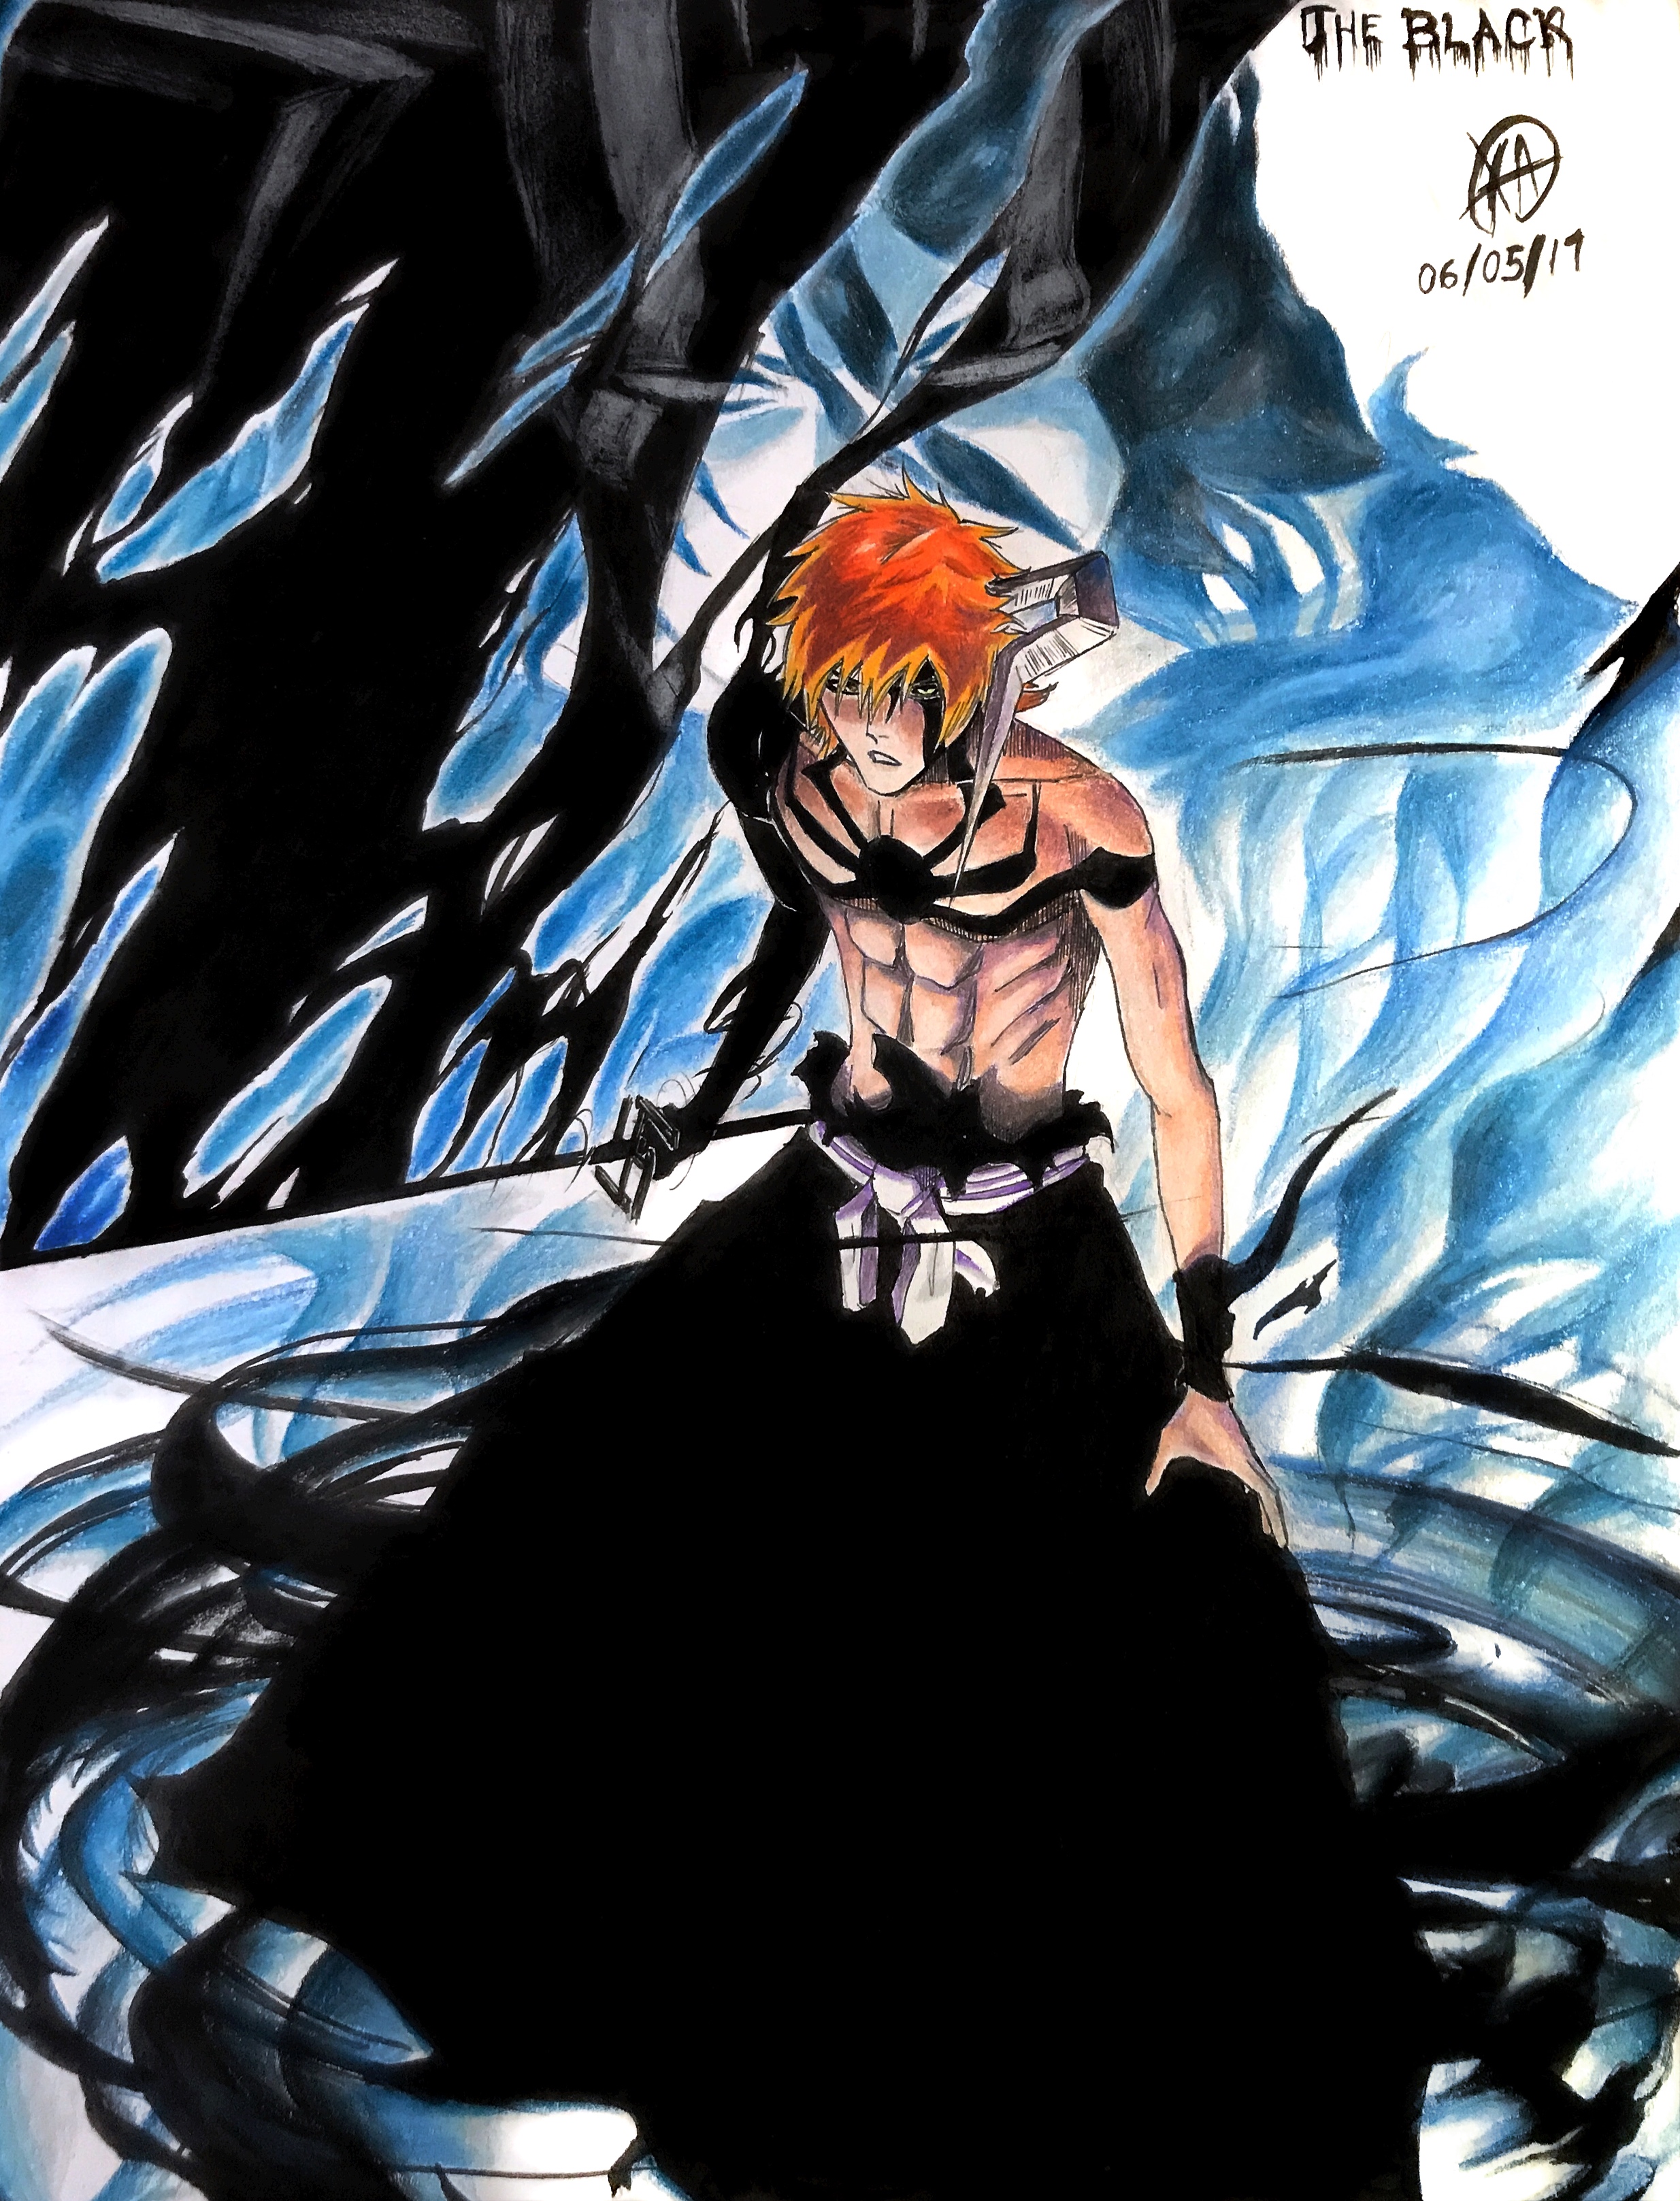 bleach 409 page 2 full color by thegetsugatenshou on DeviantArt